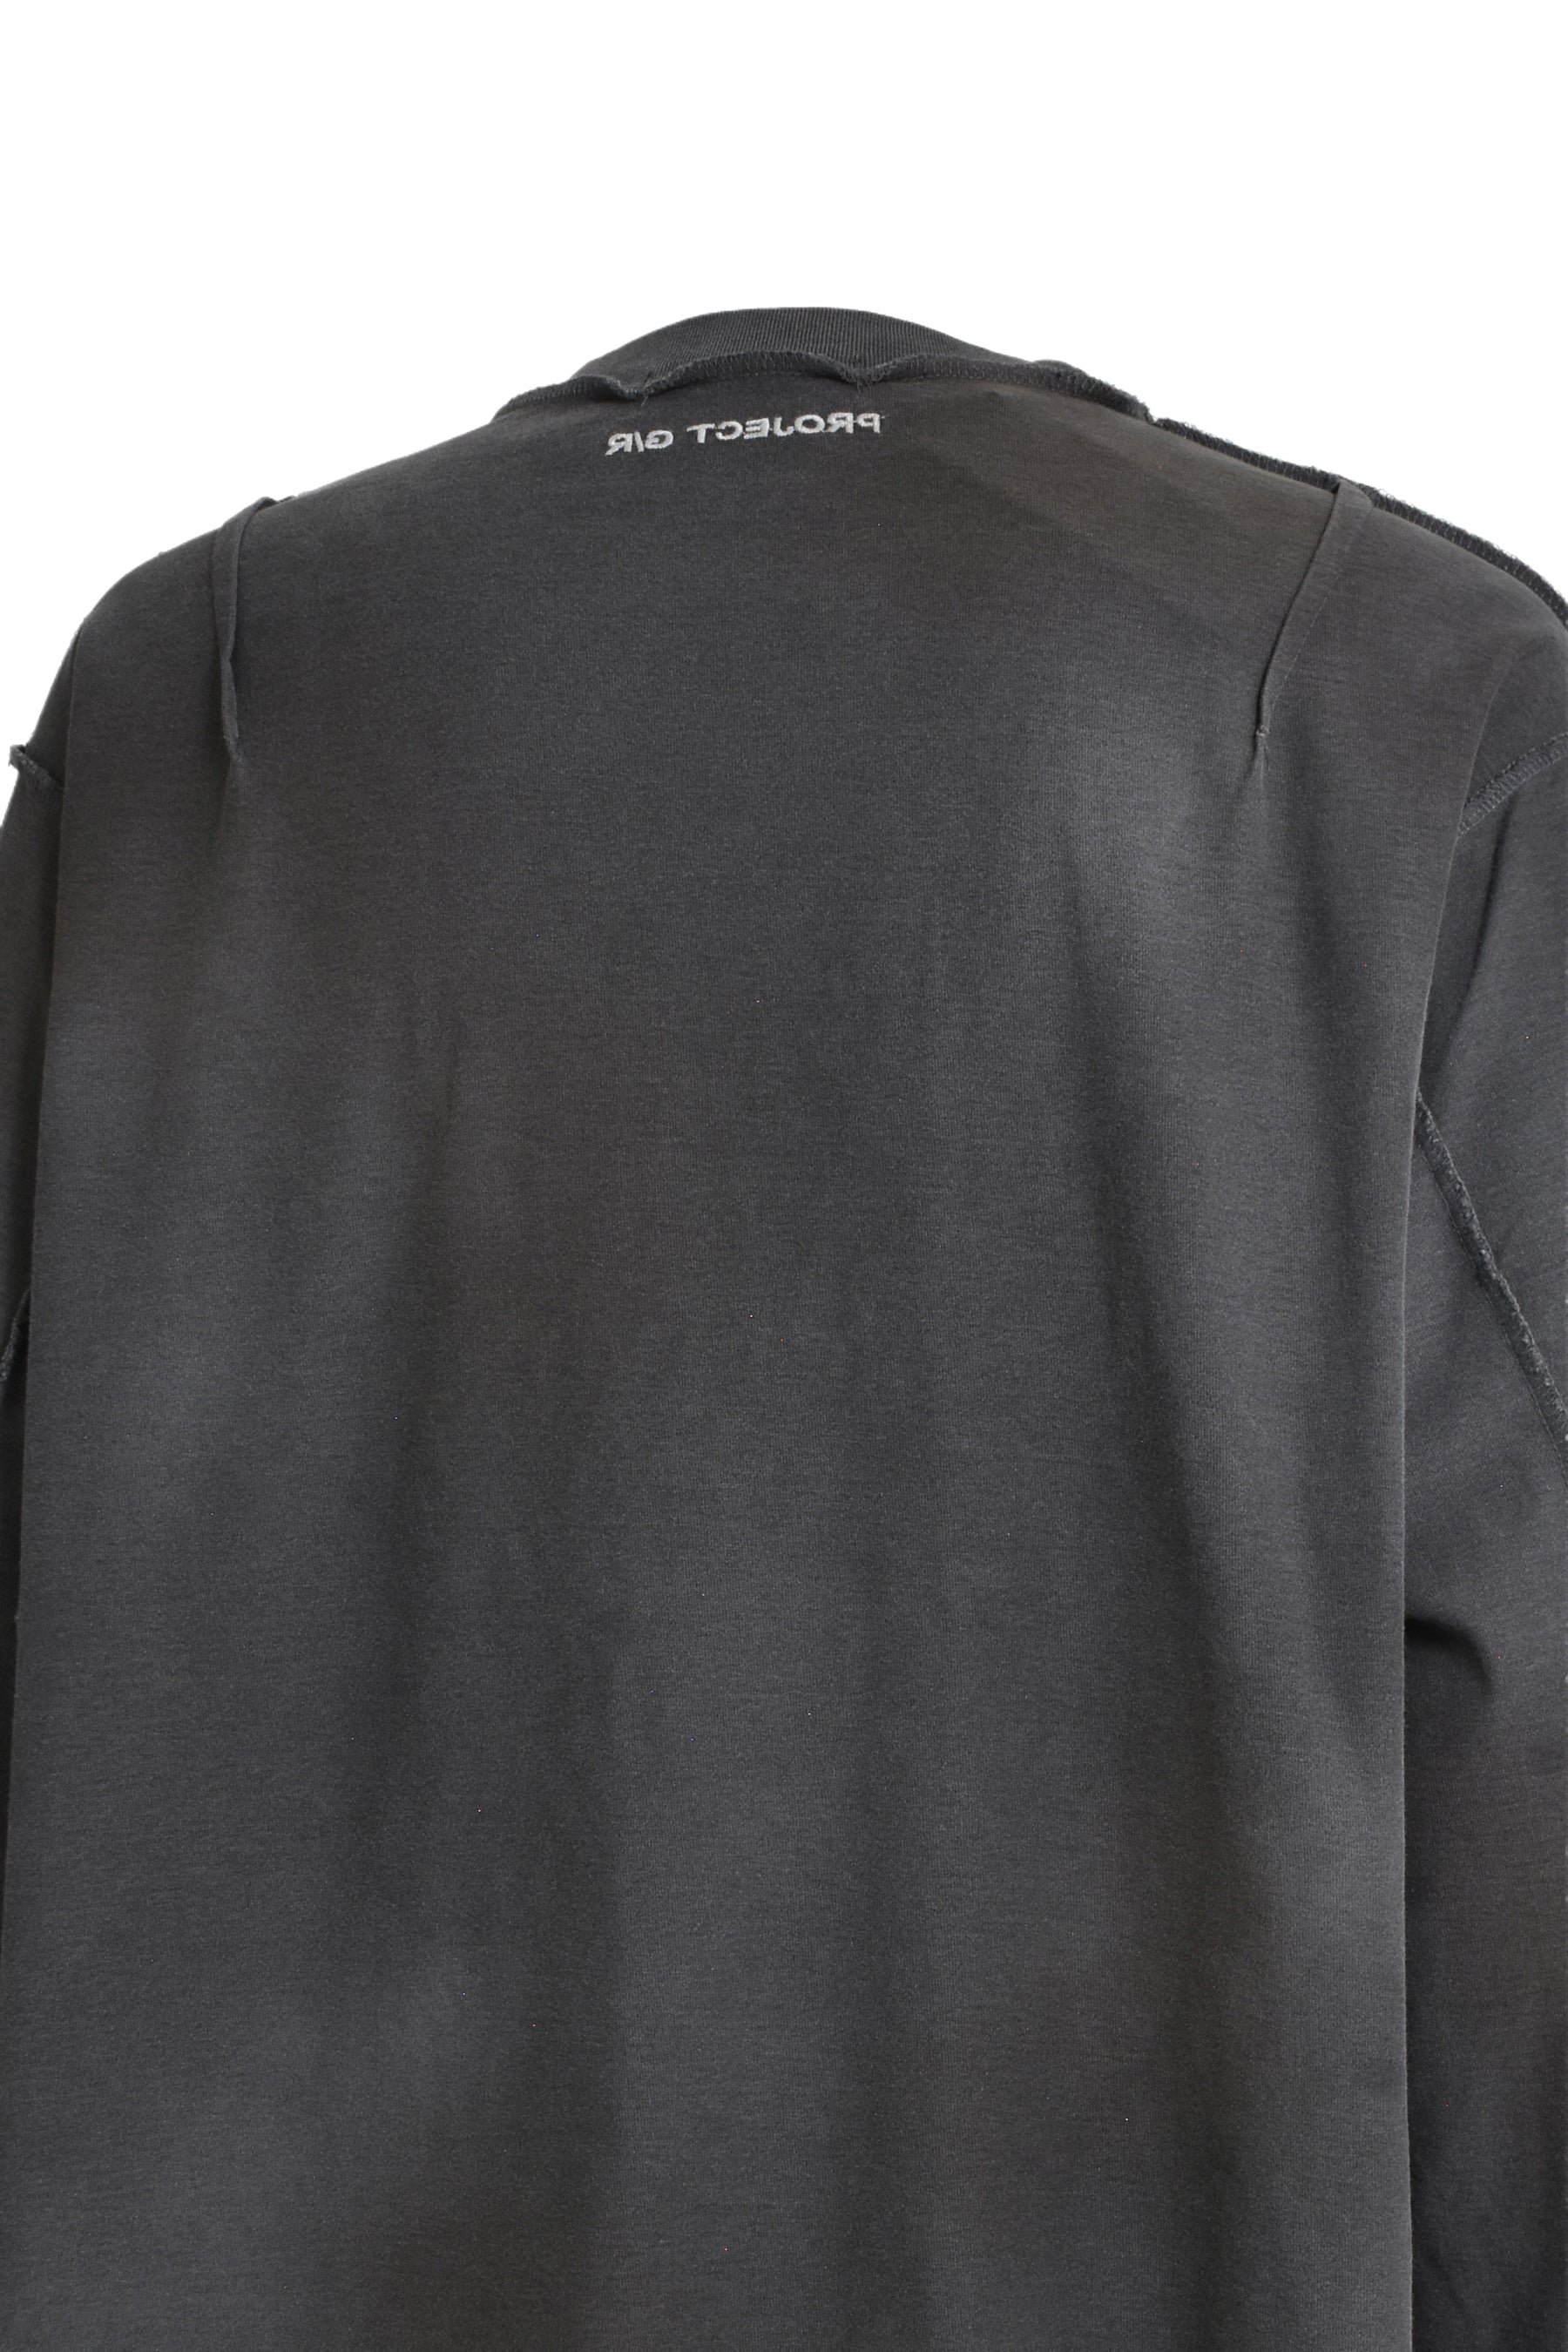 INSIDE OUT LONG SLEEVE / FADED BLK